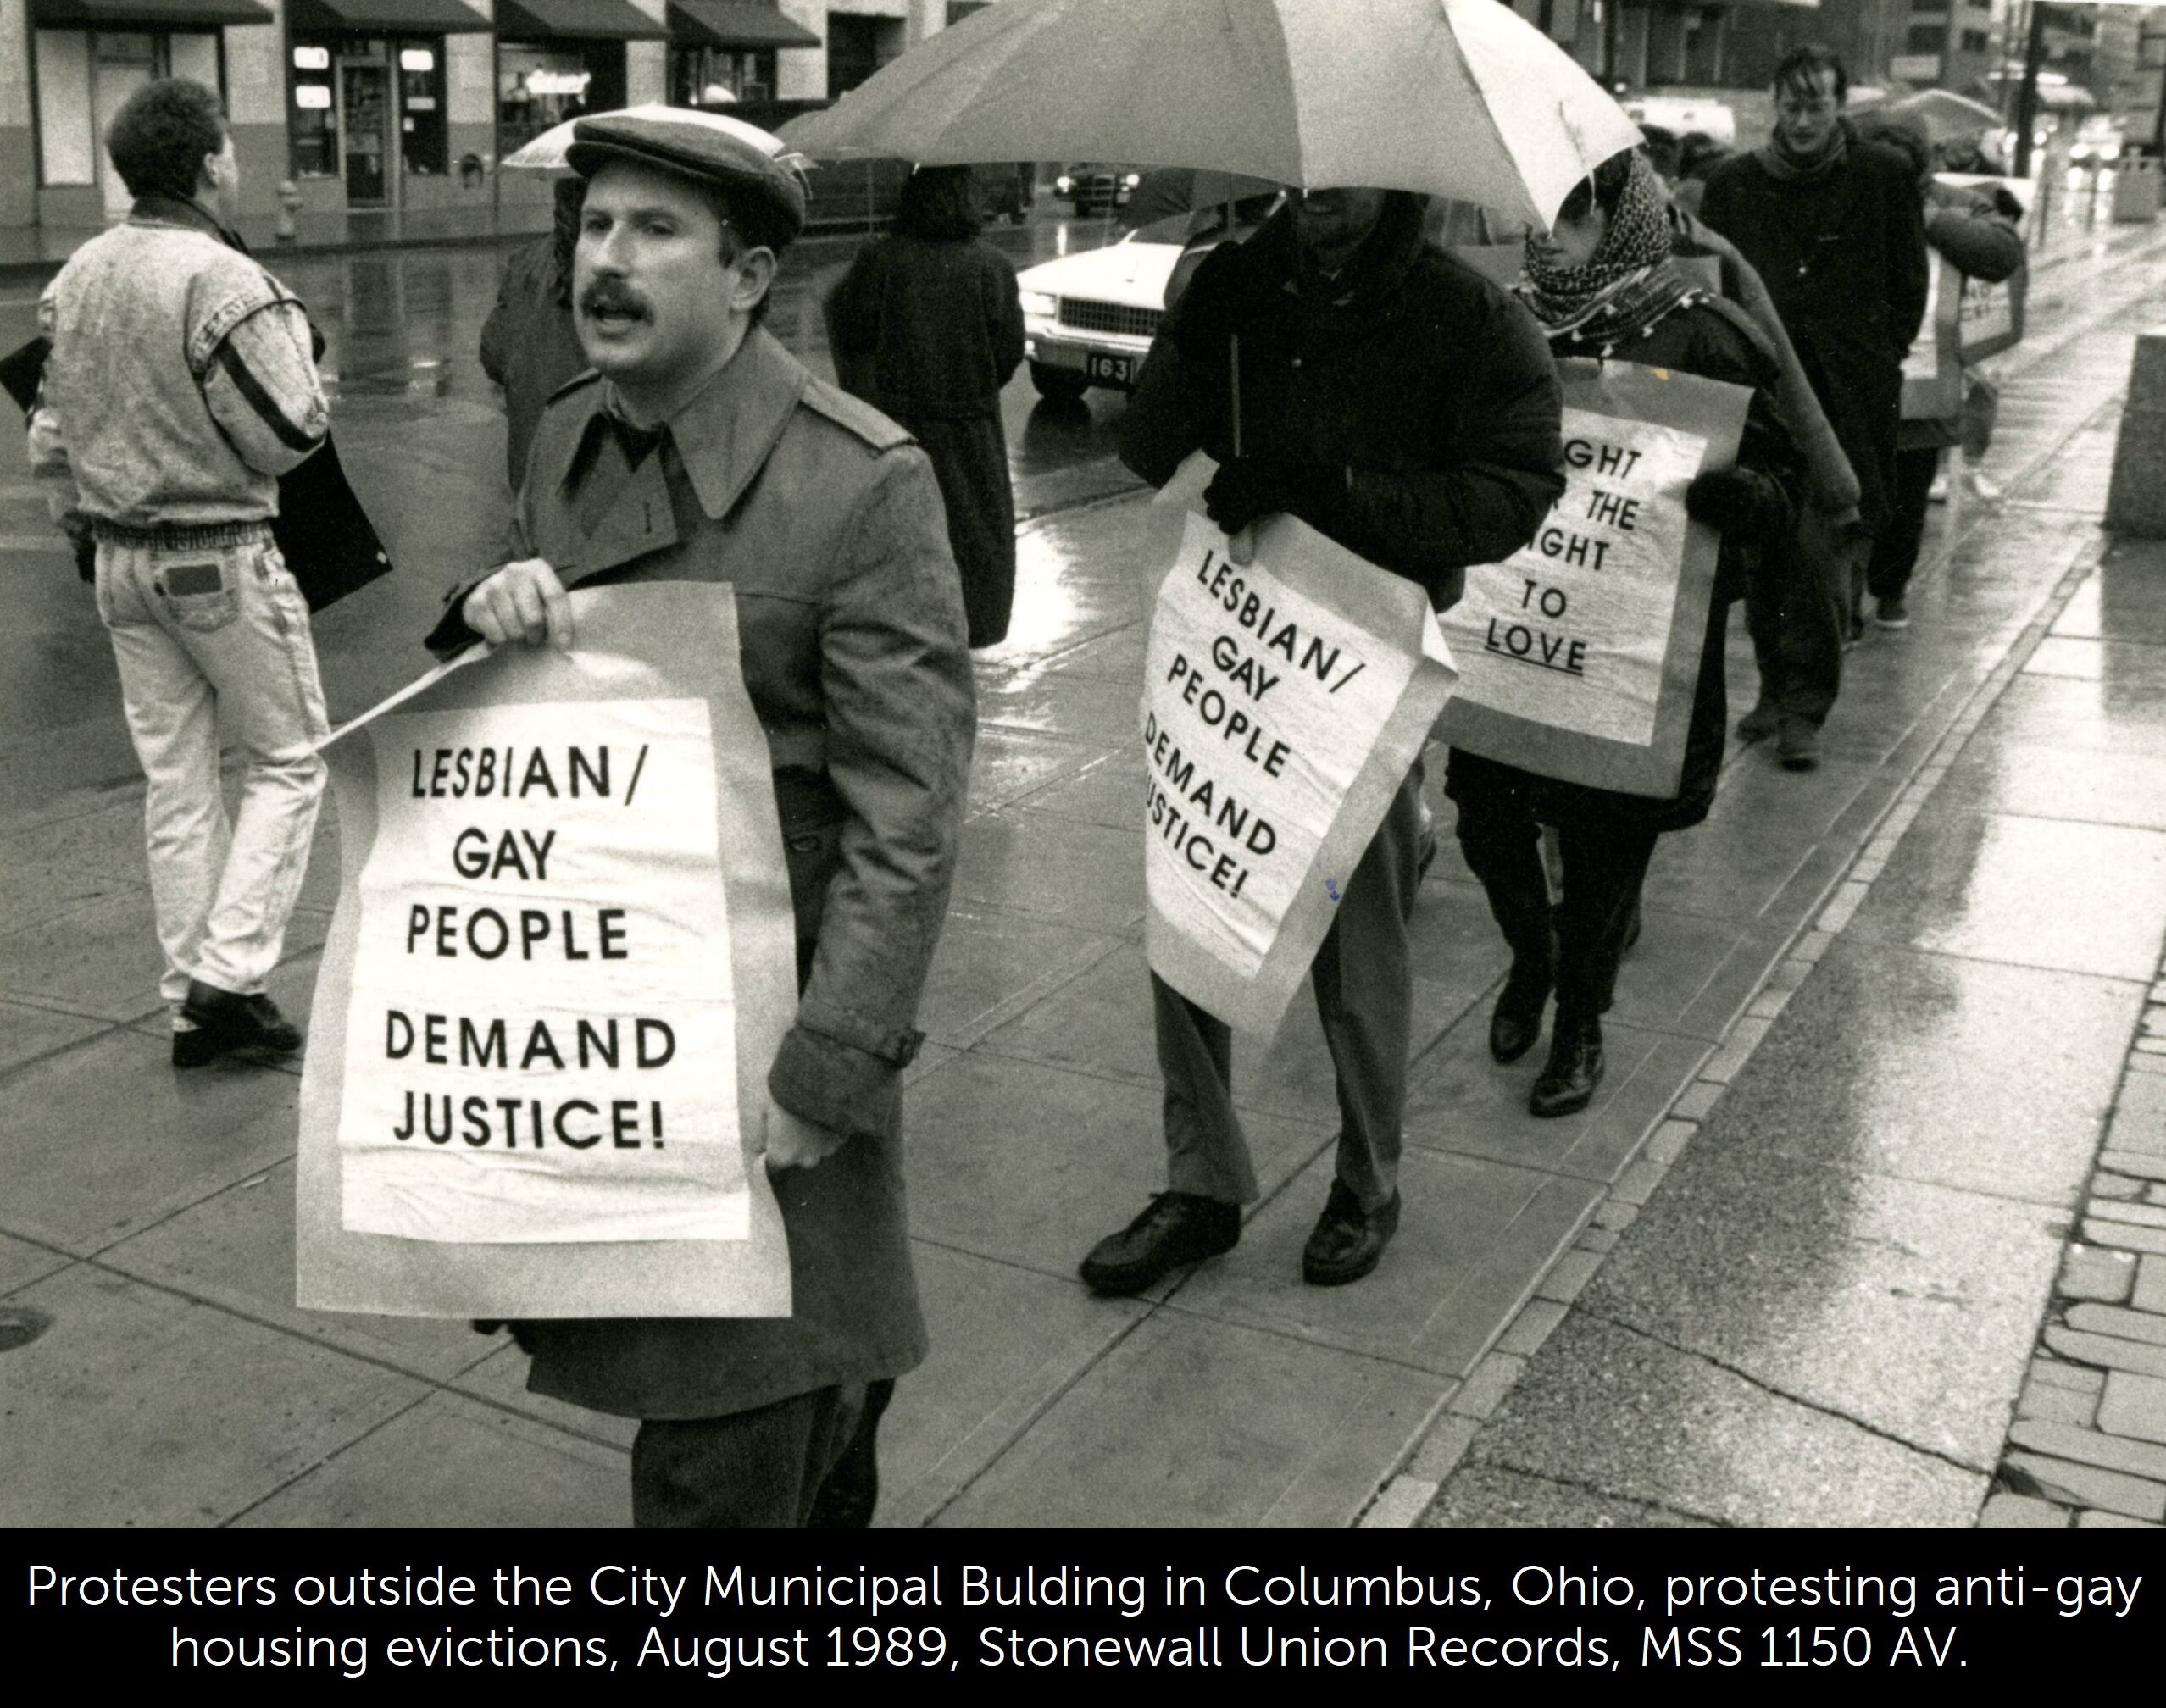 A black and white photo of protesters outside the City Municipal Building in Columbus, holding signs that state, "Lesbian/gay people demand justice!"